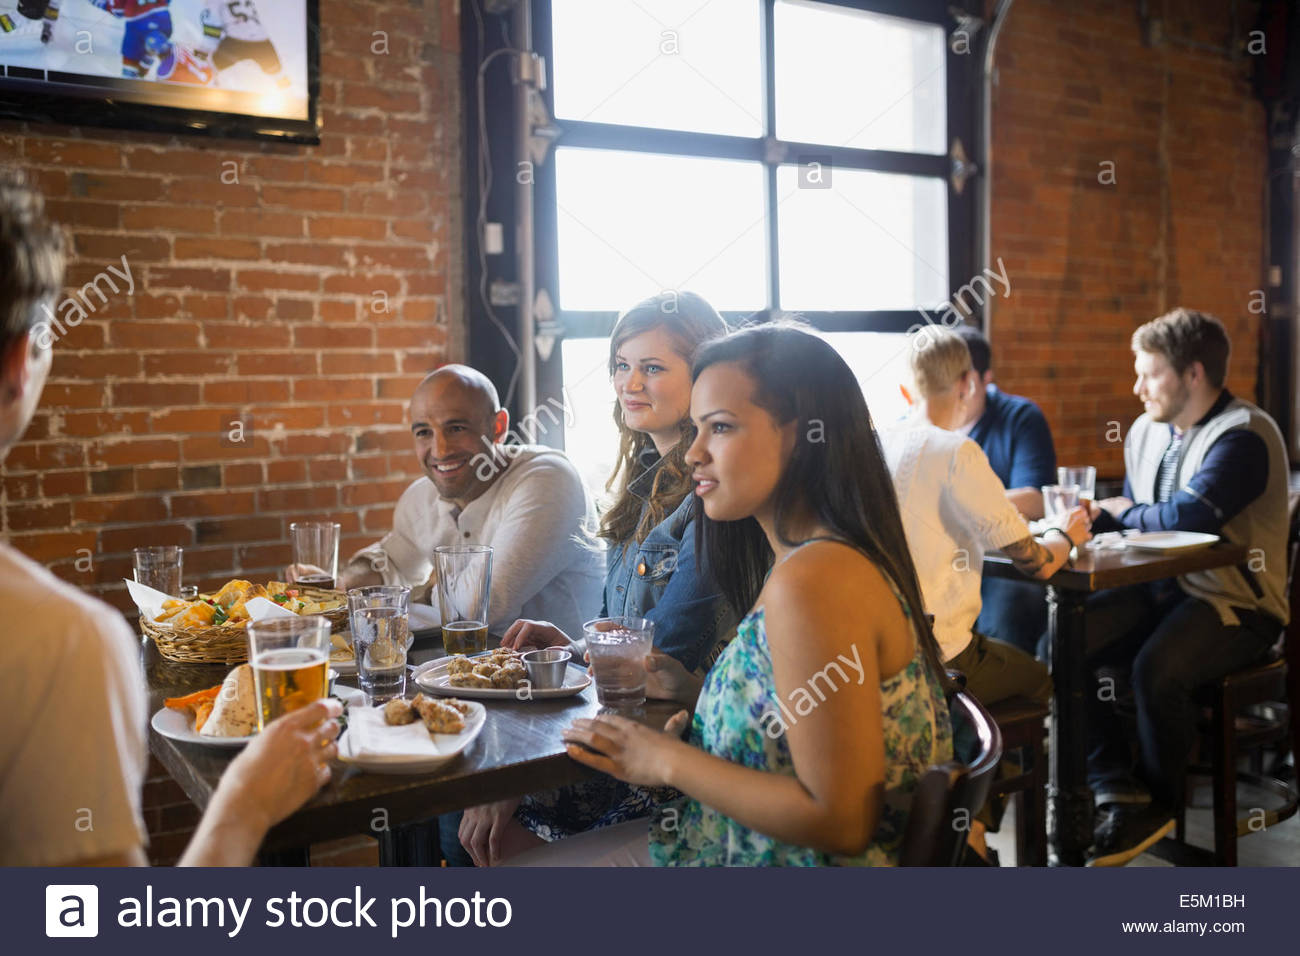 Friends talking and eating in pub Stock Photo